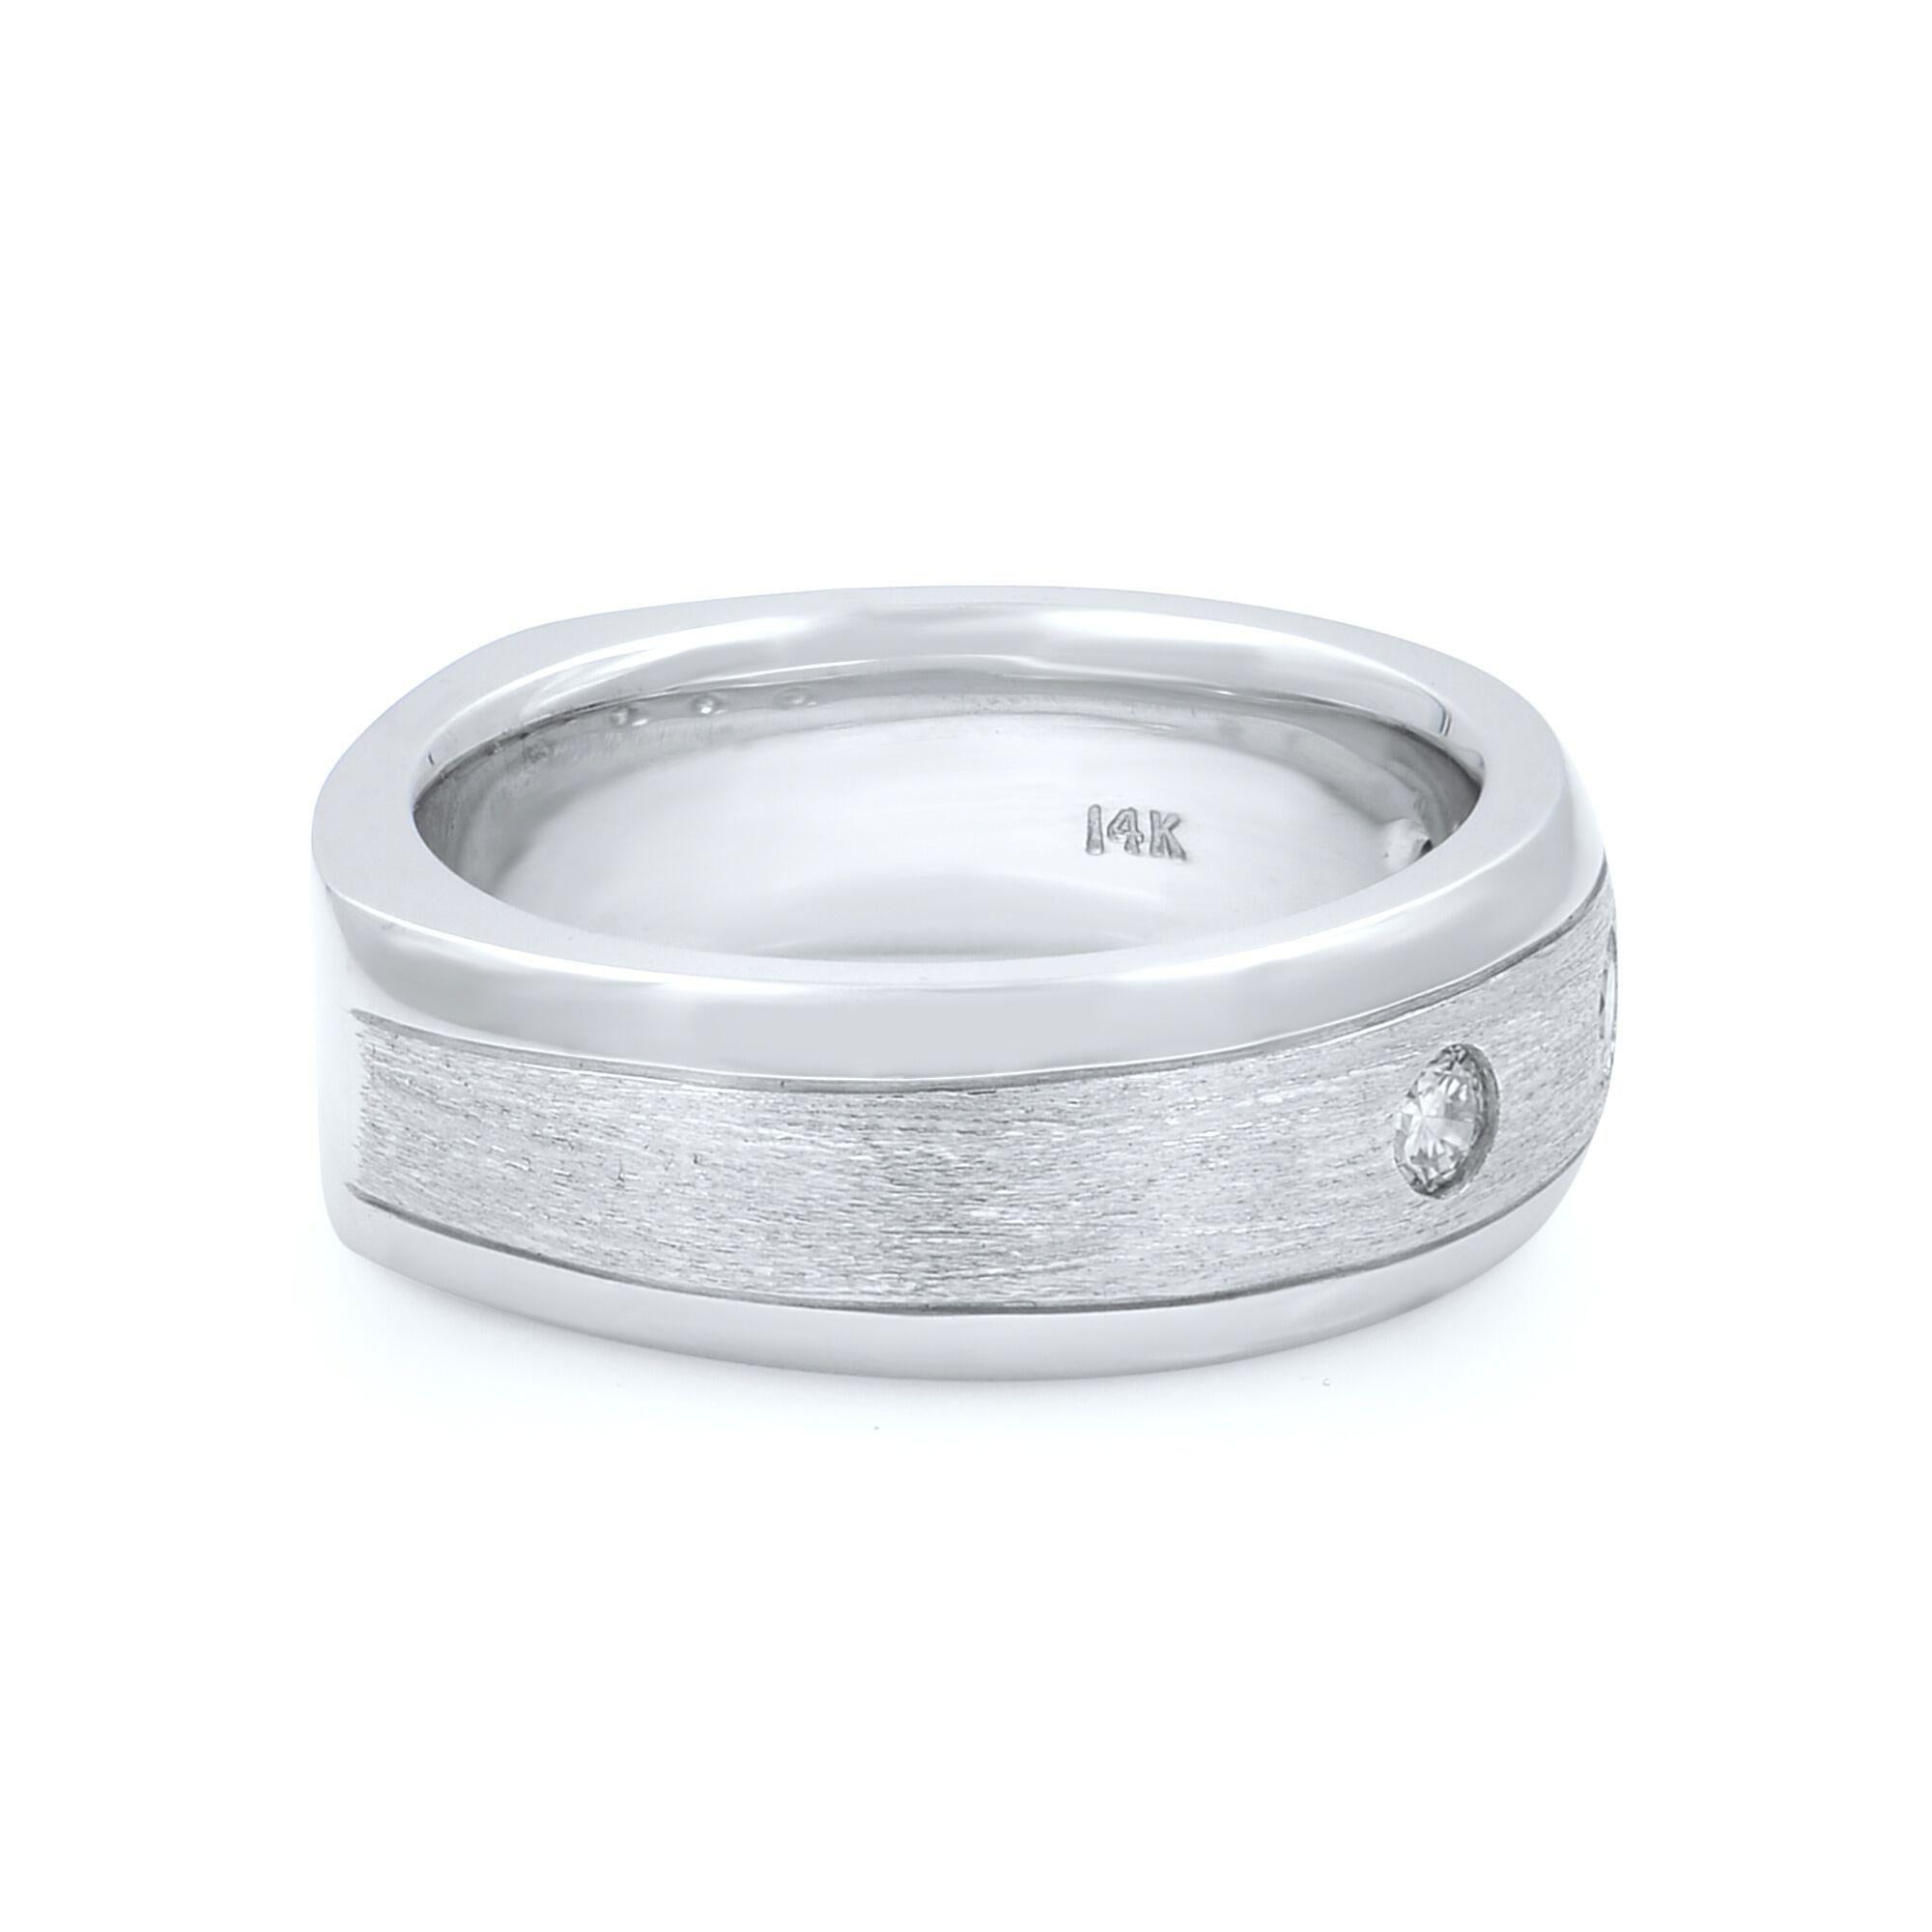 This solid wedding band is crafted in 14K white gold, featuring 3 round cut diamonds with a total diamond carat weight of 0.28. The ring size is 9 and weighs 16 grams. It comes in a presentable gift box.